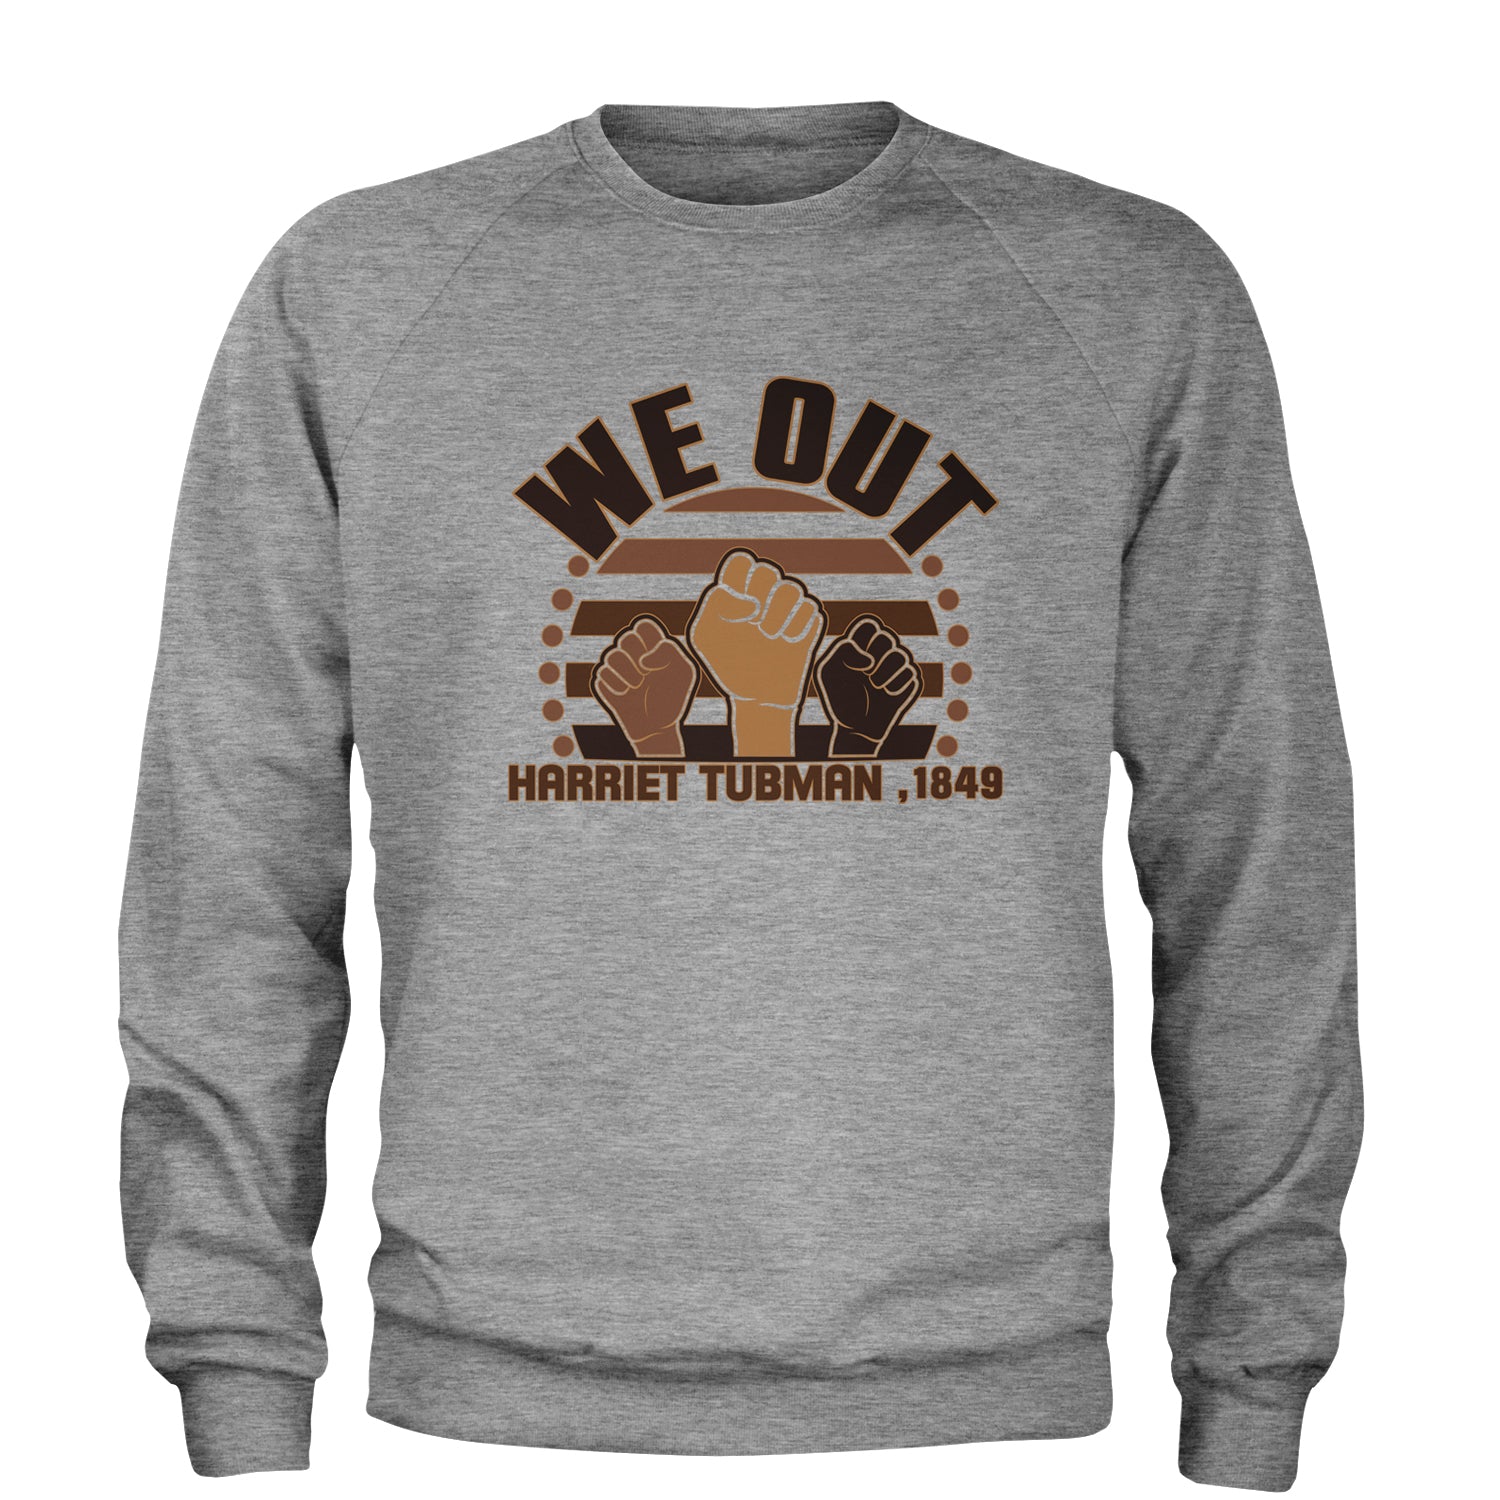 We Out Harriet Tubman Raised Fists BLM Adult Crewneck Sweatshirt african, american, black, blm, harriet, harriett, lives, matter, out, shirt, tubman, we by Expression Tees